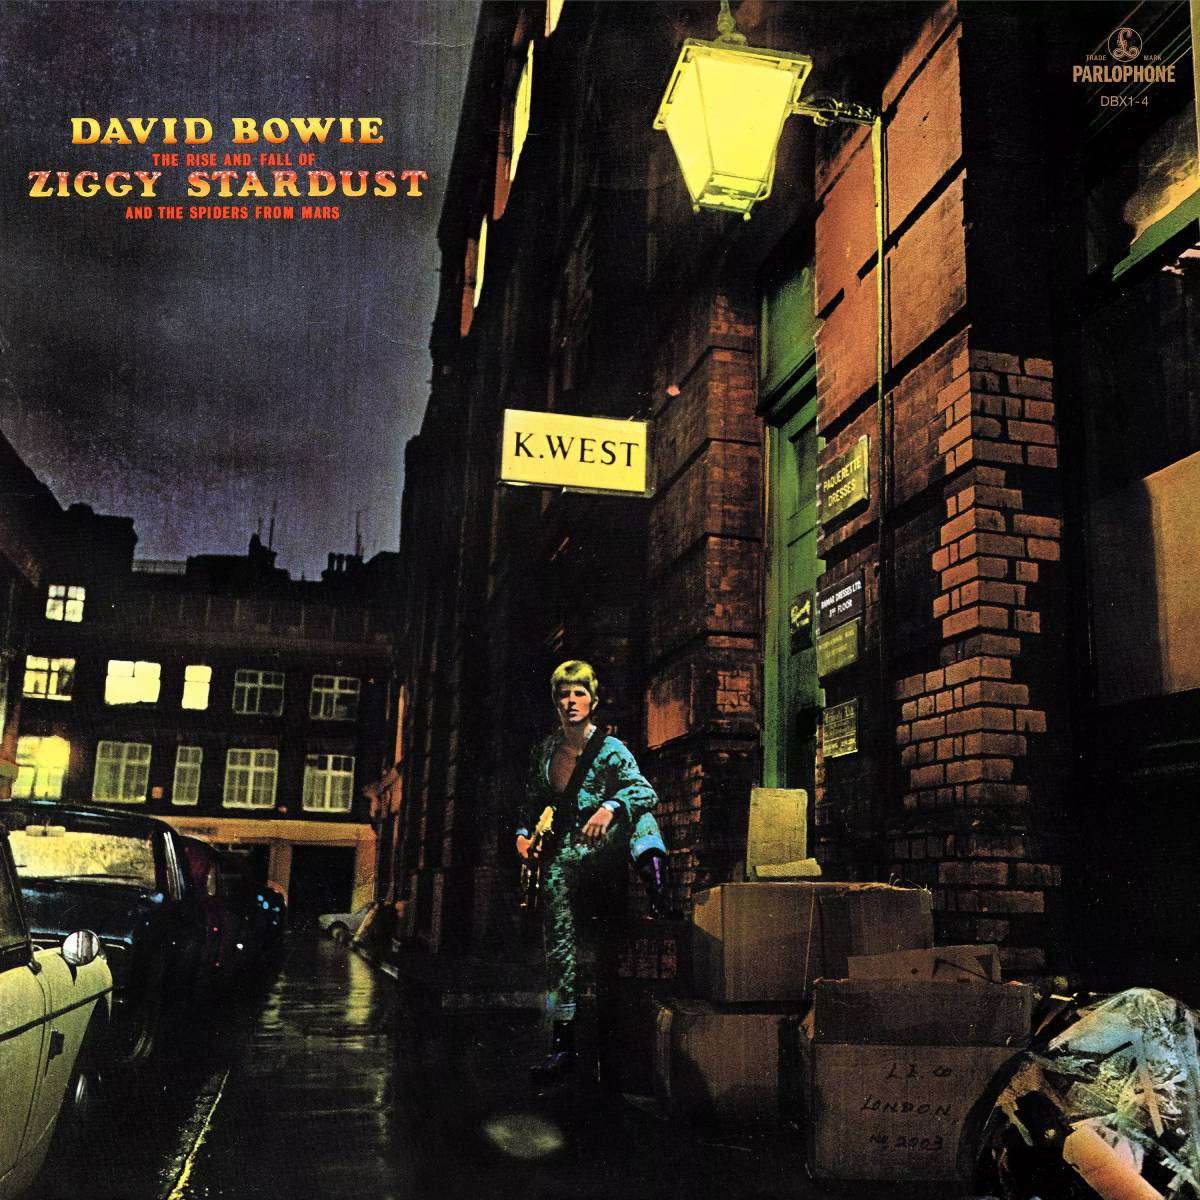 Обложка альбома Дэвида Боуи The Rise And Fall Of Ziggy Stardust And The Spiders From Mars